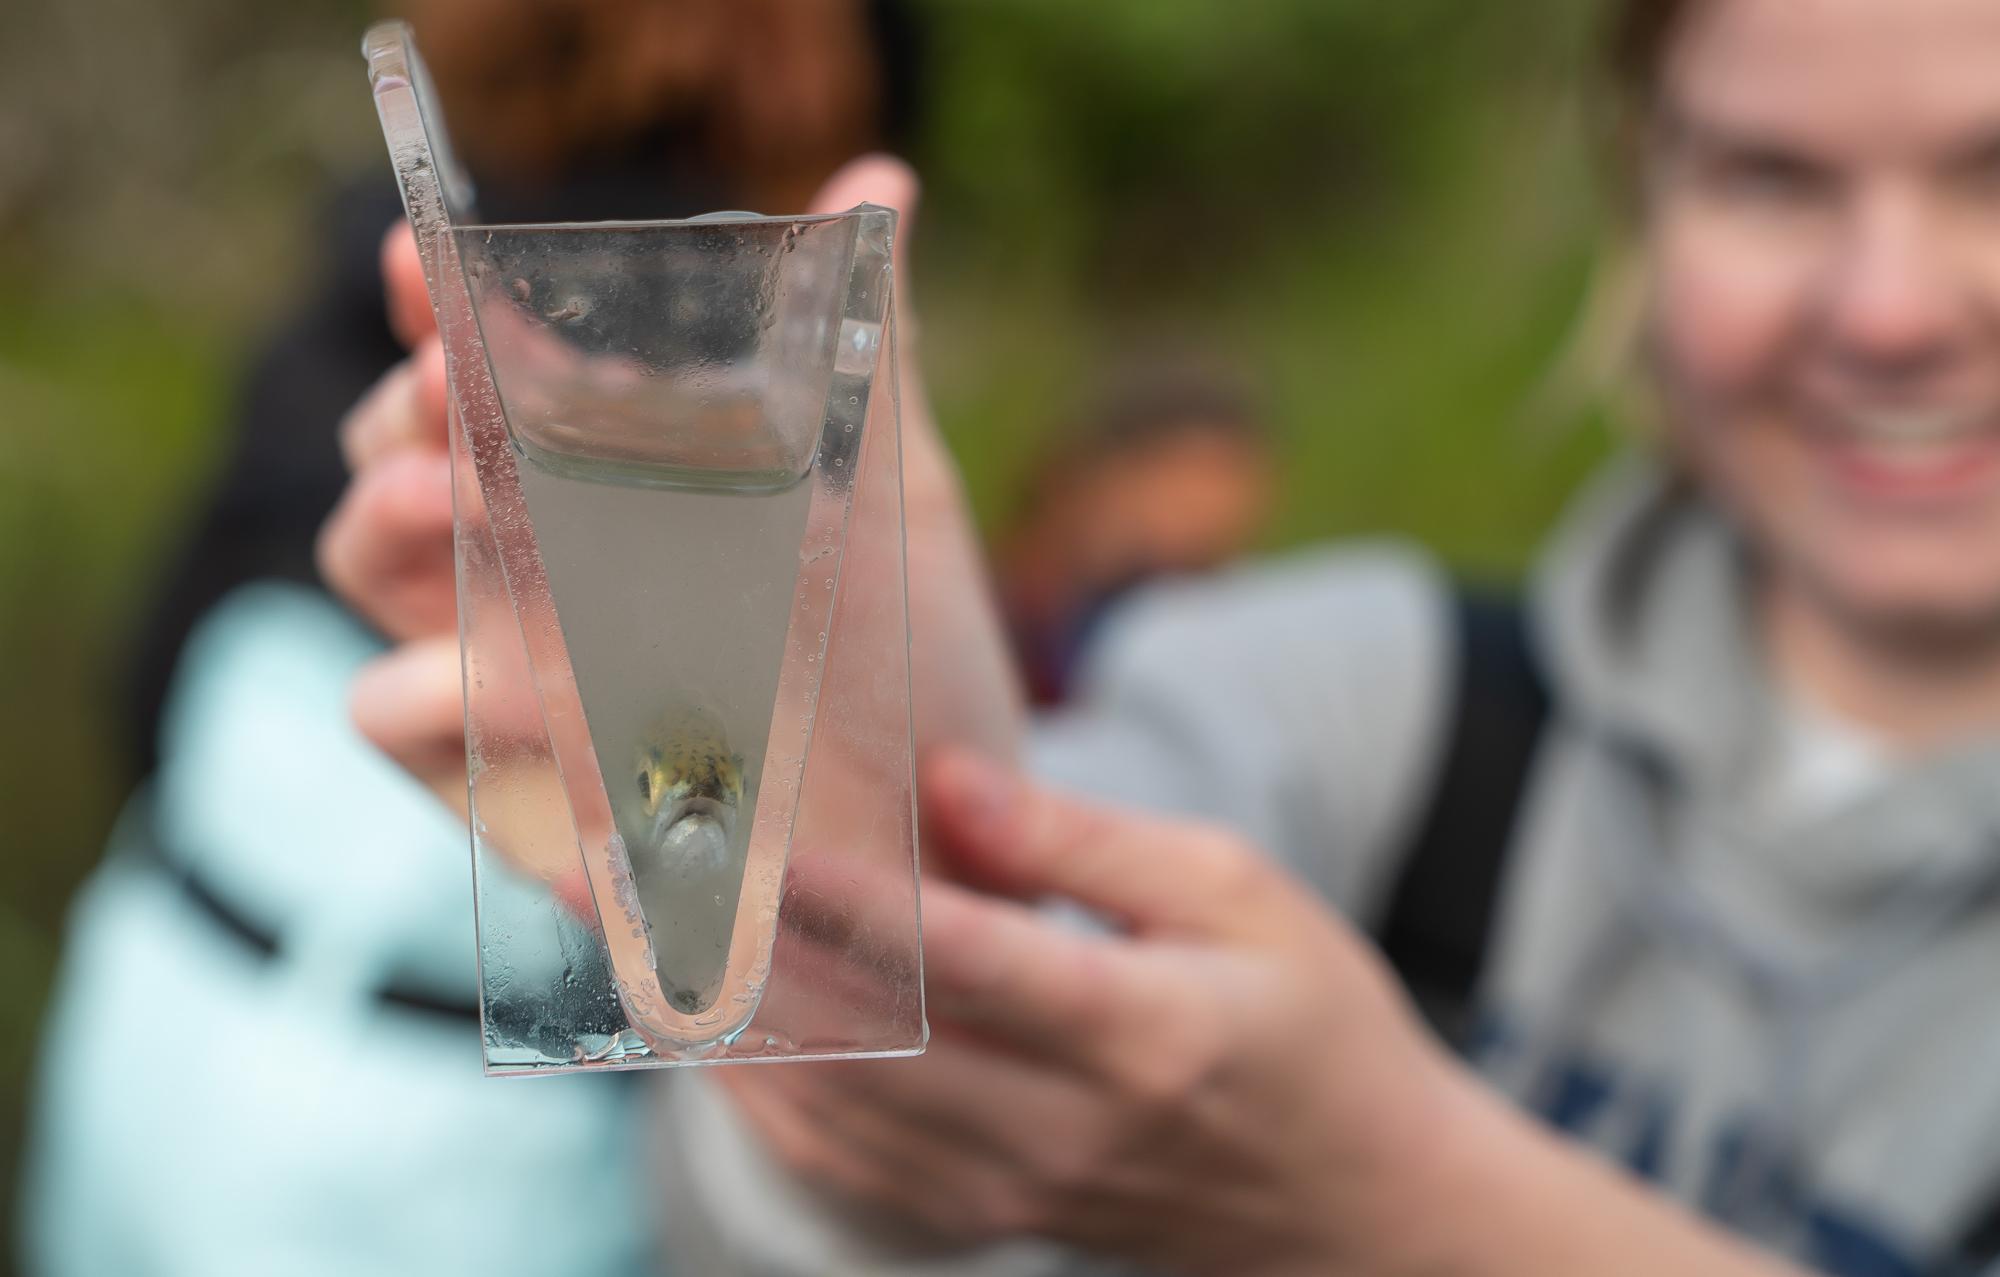 Western Washington University biology student holding a plastic container with water and a fish in it.